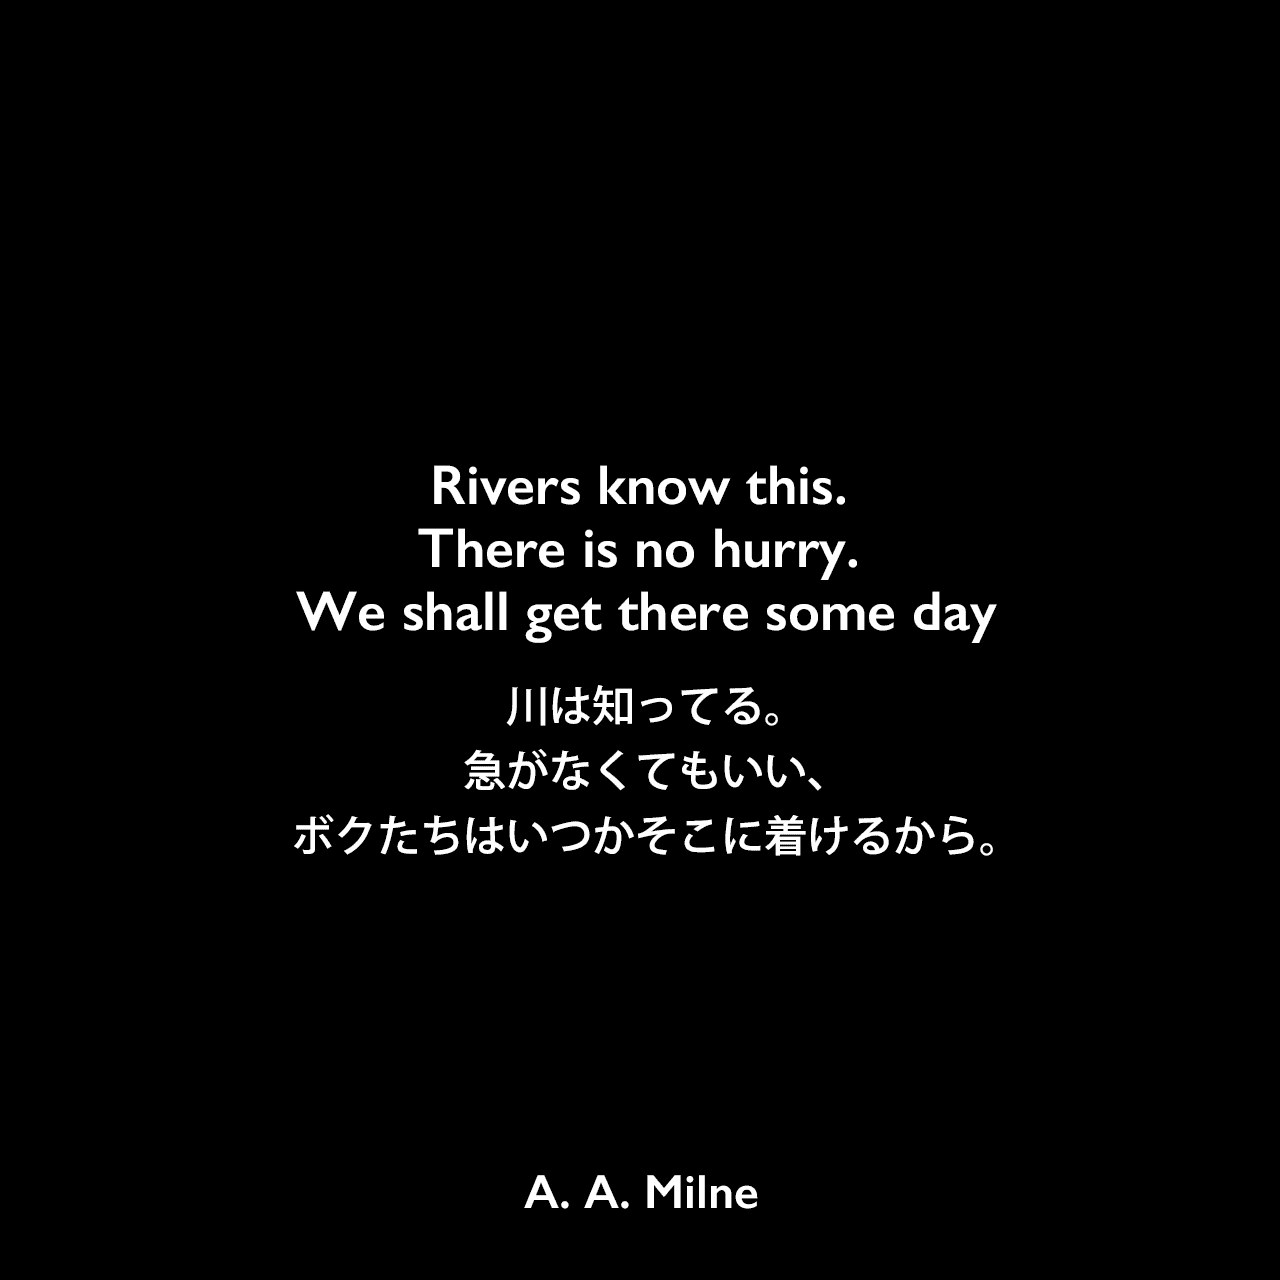 Rivers know this. There is no hurry. We shall get there some day.川は知ってる。急がなくてもいい、ボクたちはいつかそこに着けるから。